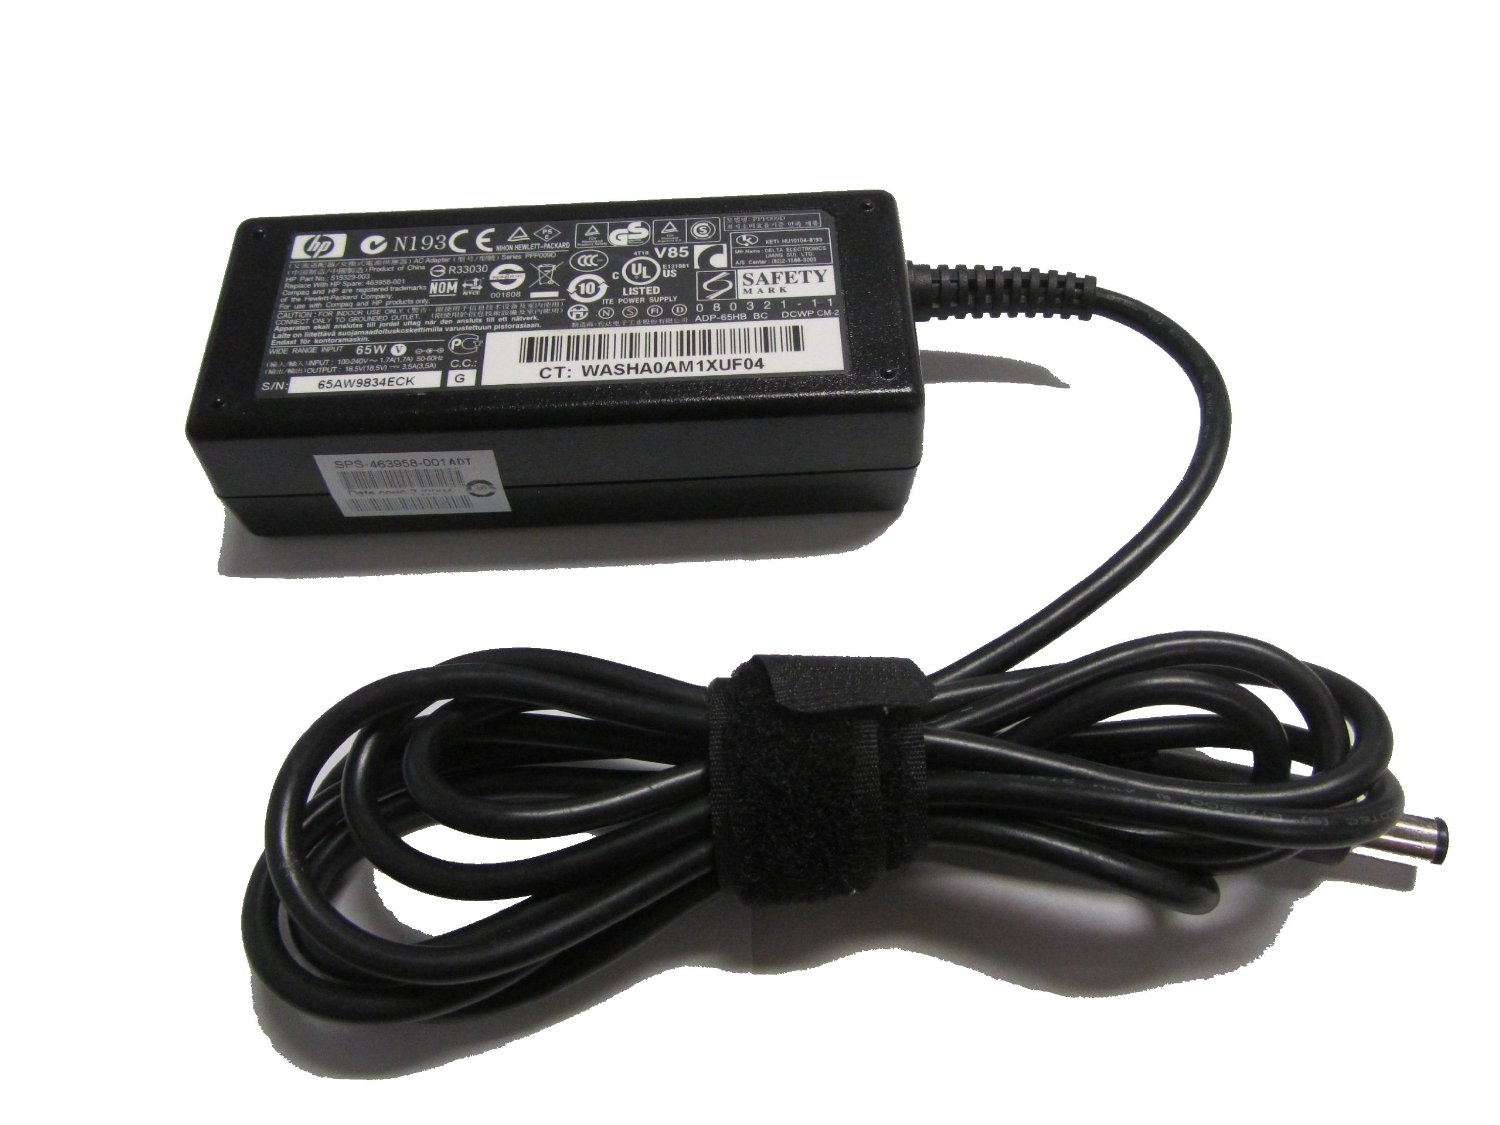 Original Adapter Charger For HP